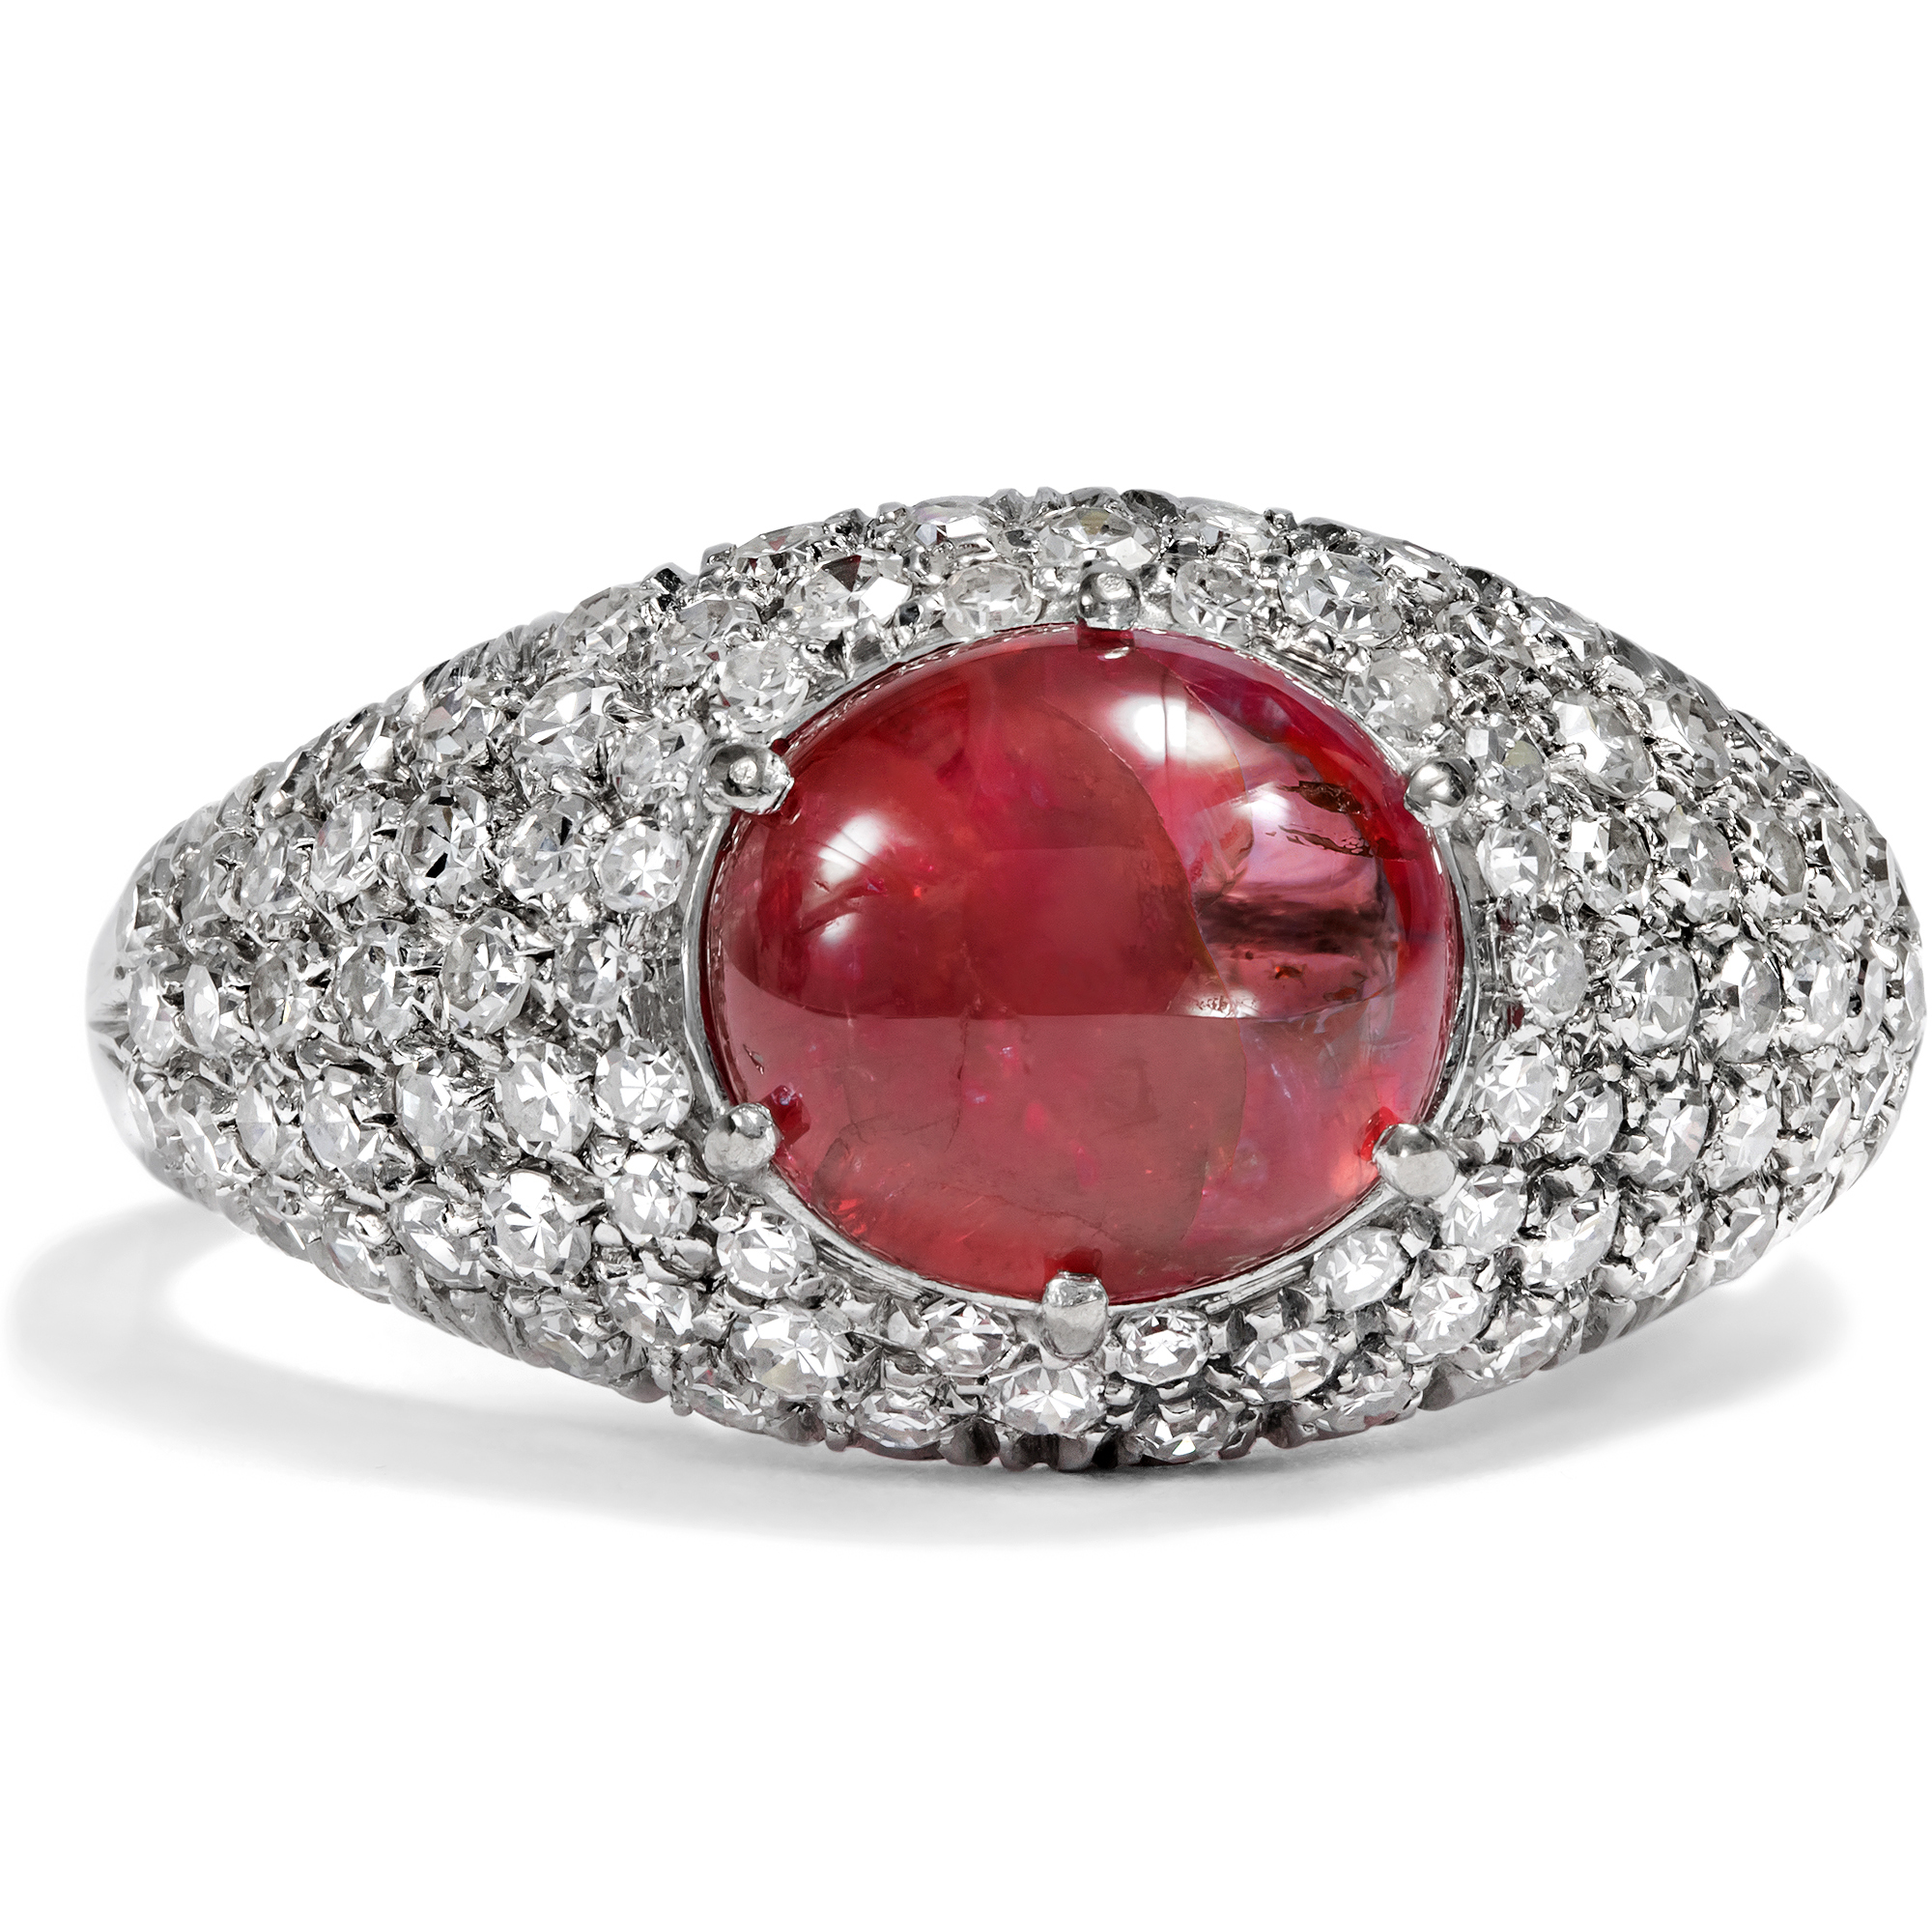 Fine vintage ring with untreated ruby & diamonds, around 1990